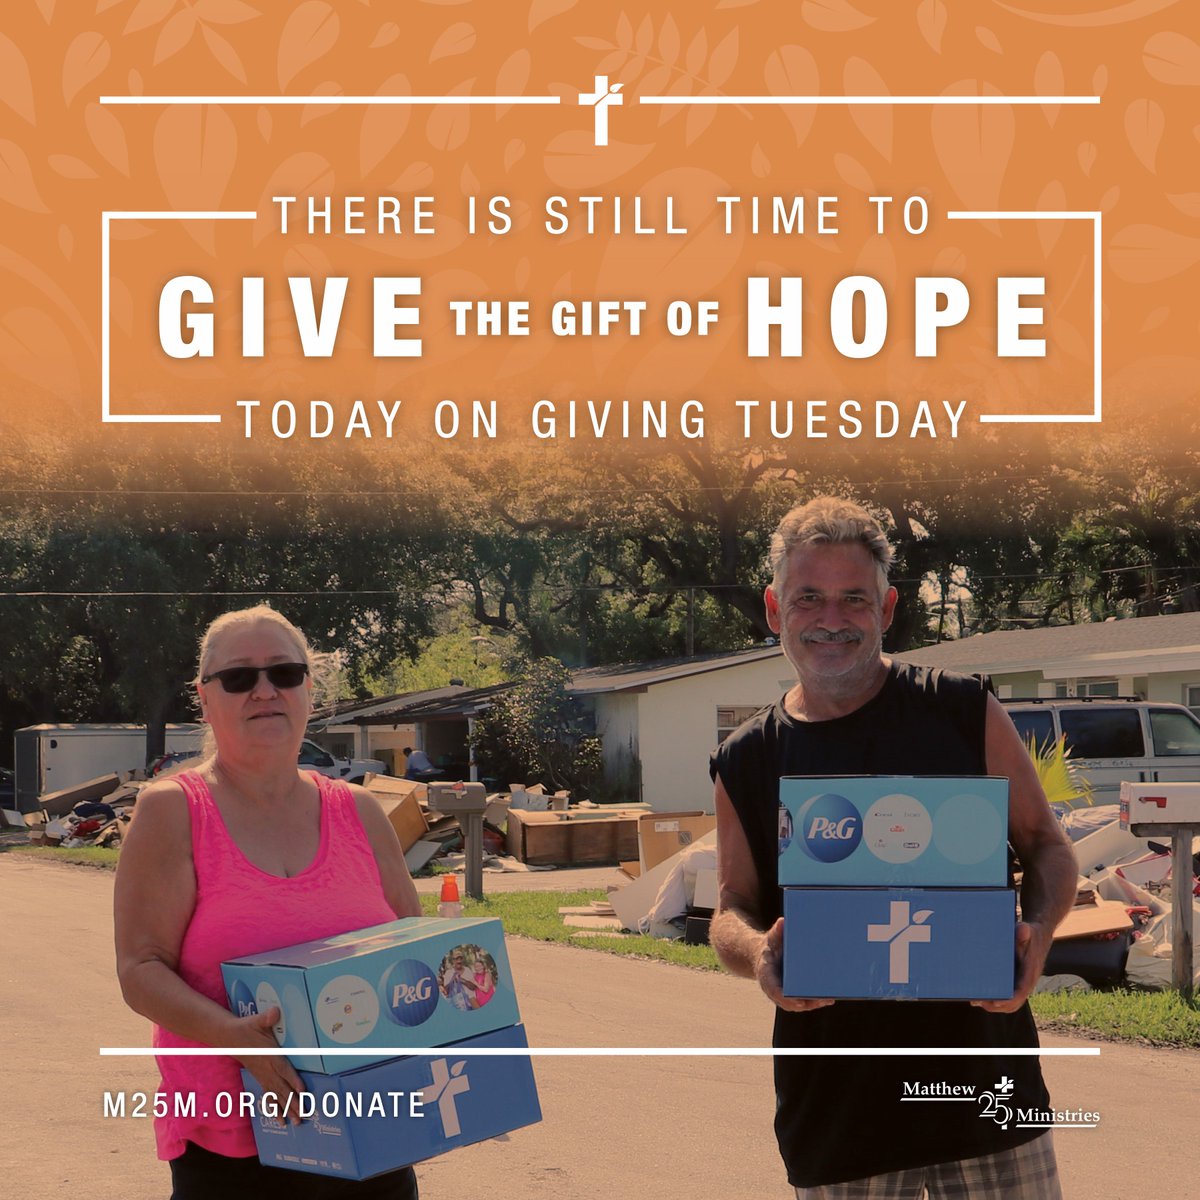 There's still time to give the gift of hope today on Giving Tuesday! Your support provides critical help to the poorest of the poor and disaster victims throughout the U.S. and worldwide. Visit m25m.org/donate to give online and to learn more about our work.